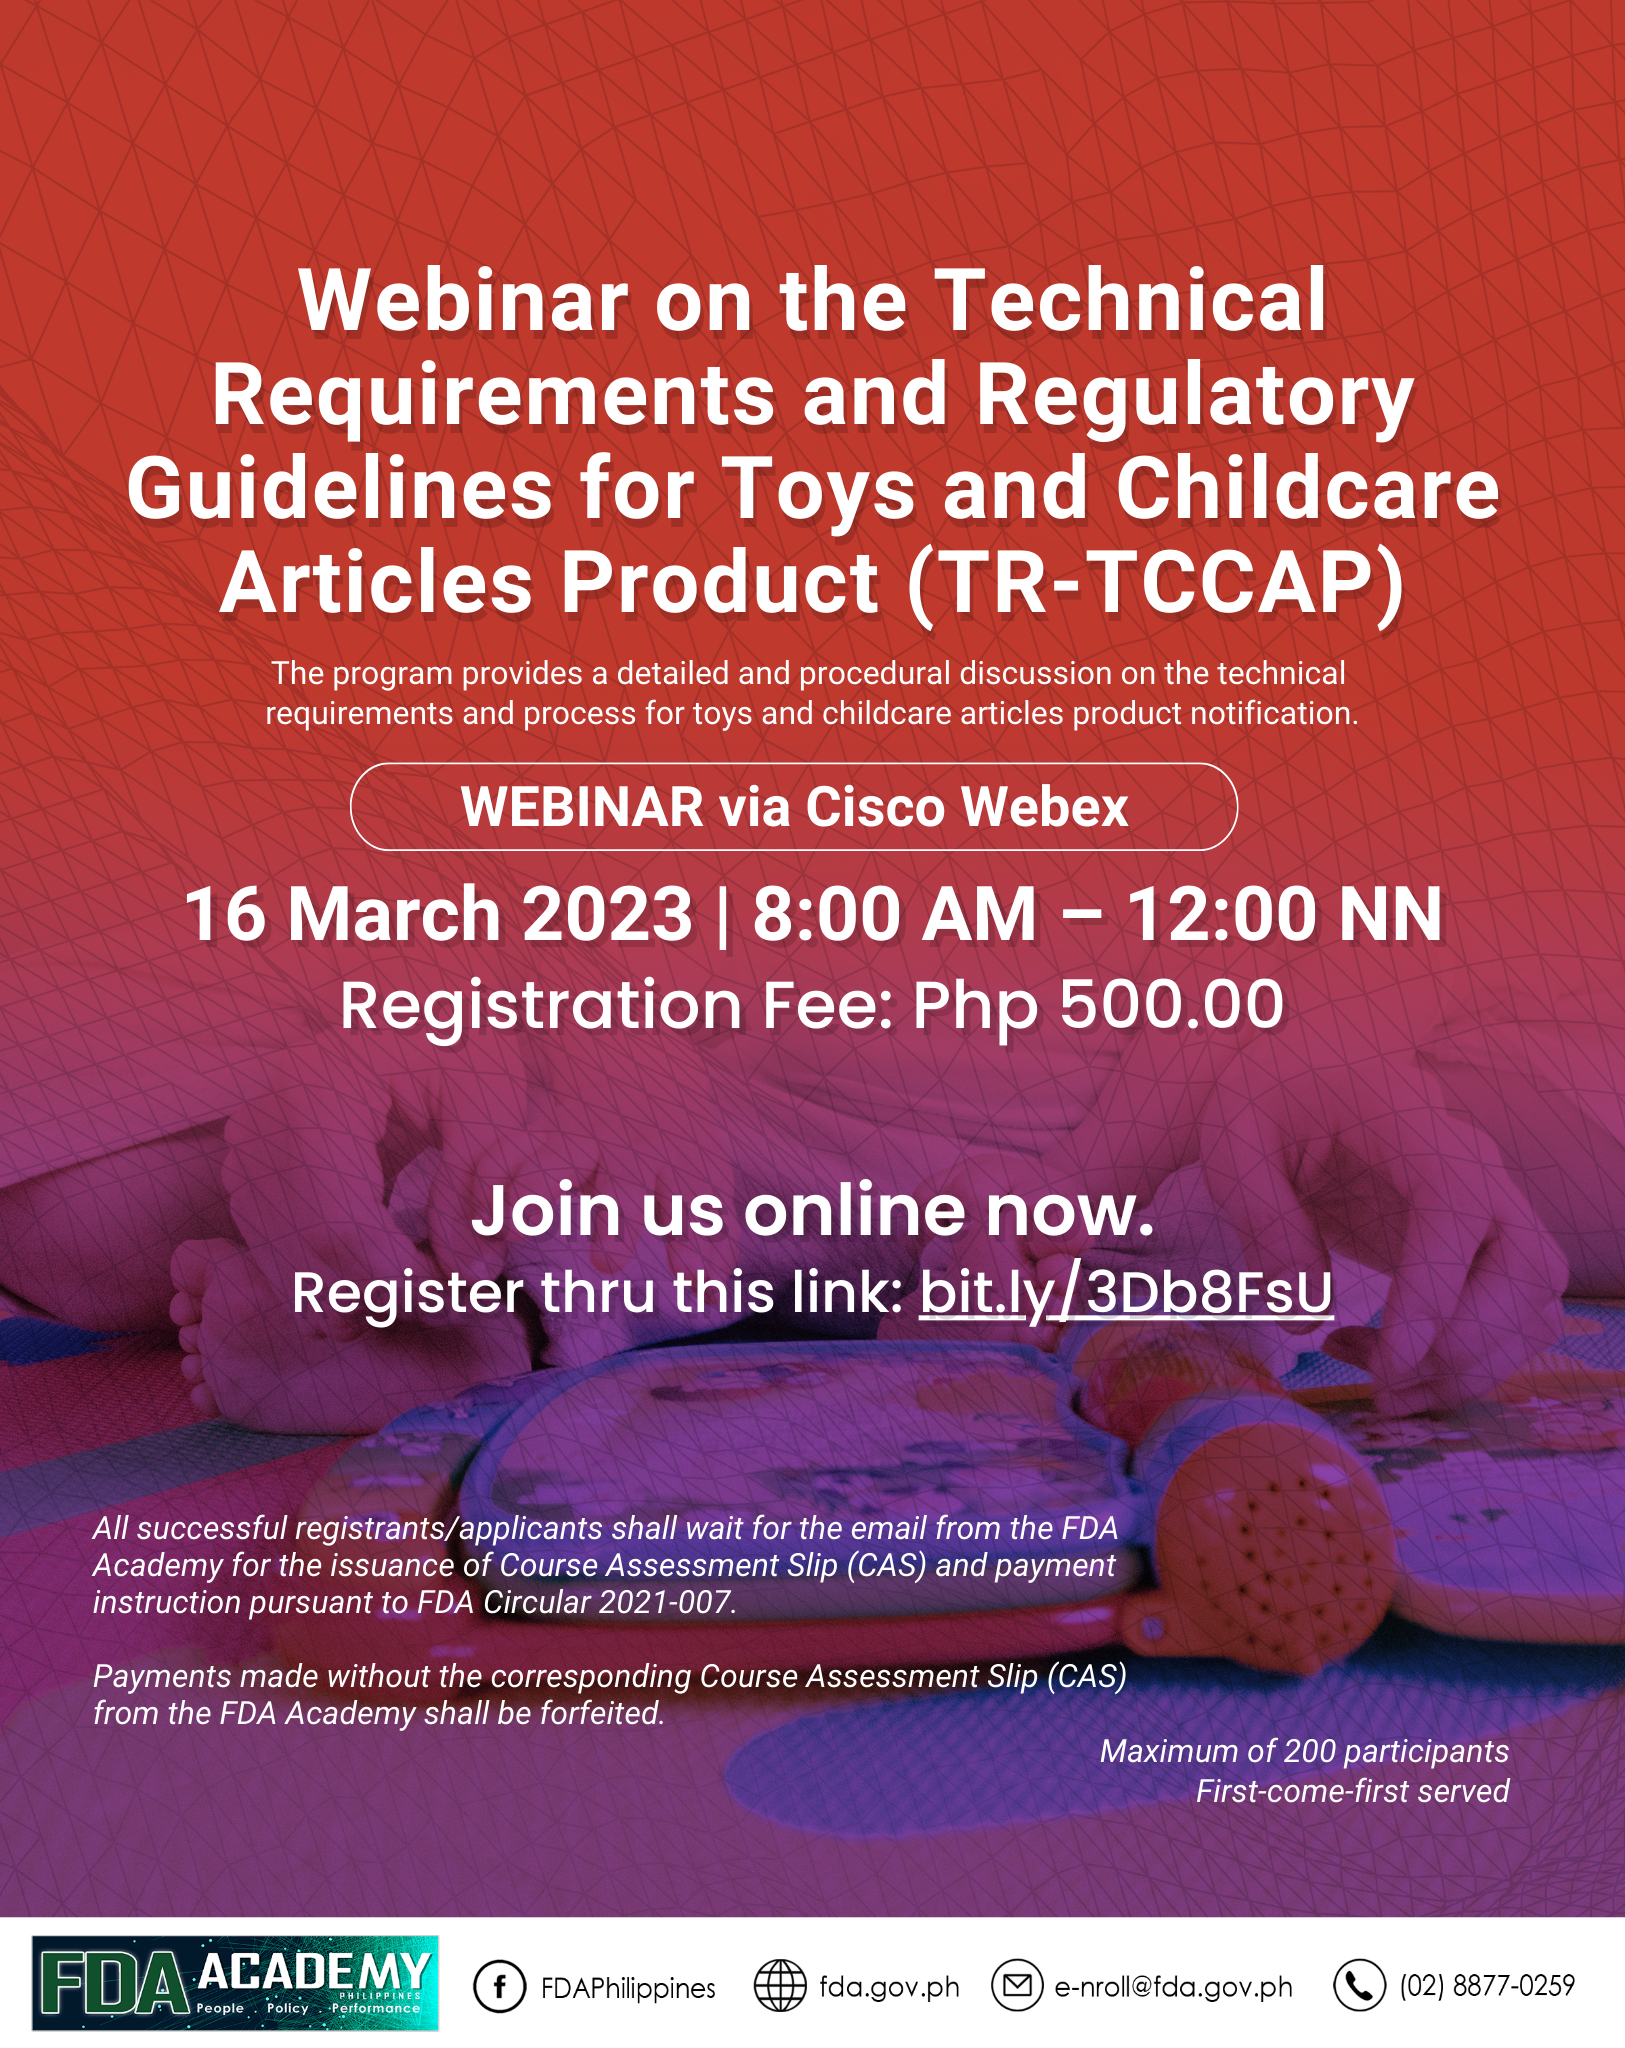 Webinar on the Technical Requirements and Regulatory Guidelines for Toys and Childcare Articles (TCCA) Product (TR-TCCAP)